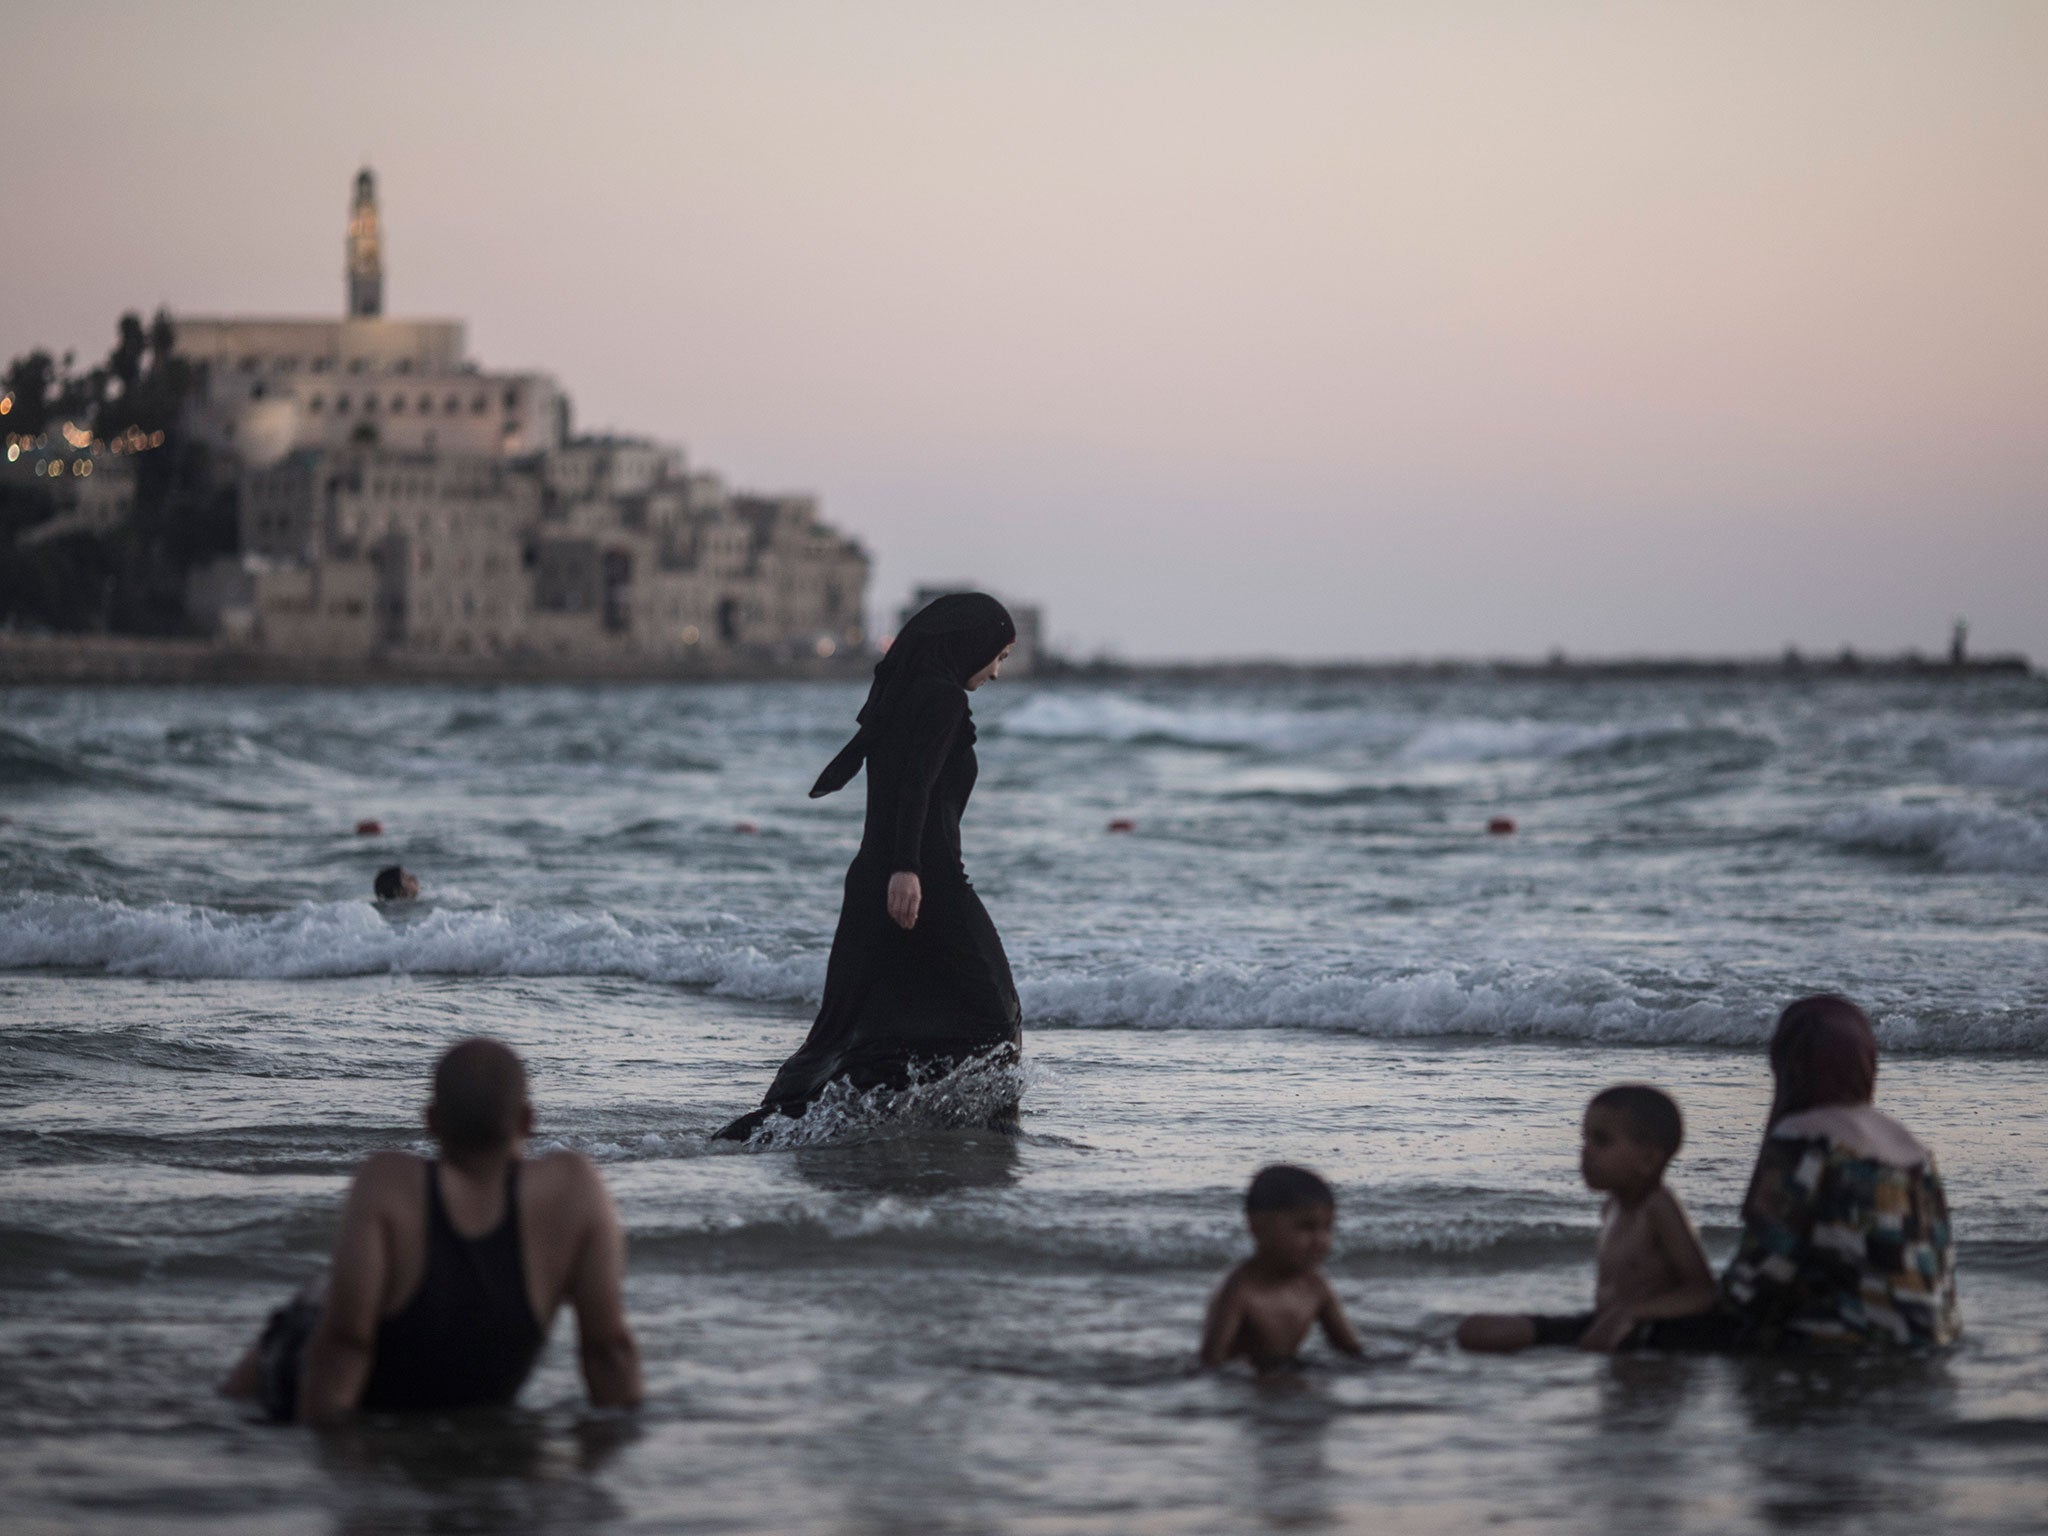 Arab Muslims splash around in the Mediterranean near Tel Aviv, Israel. The pact means that Israeli Arabs could hold the balance of power after next month’s election